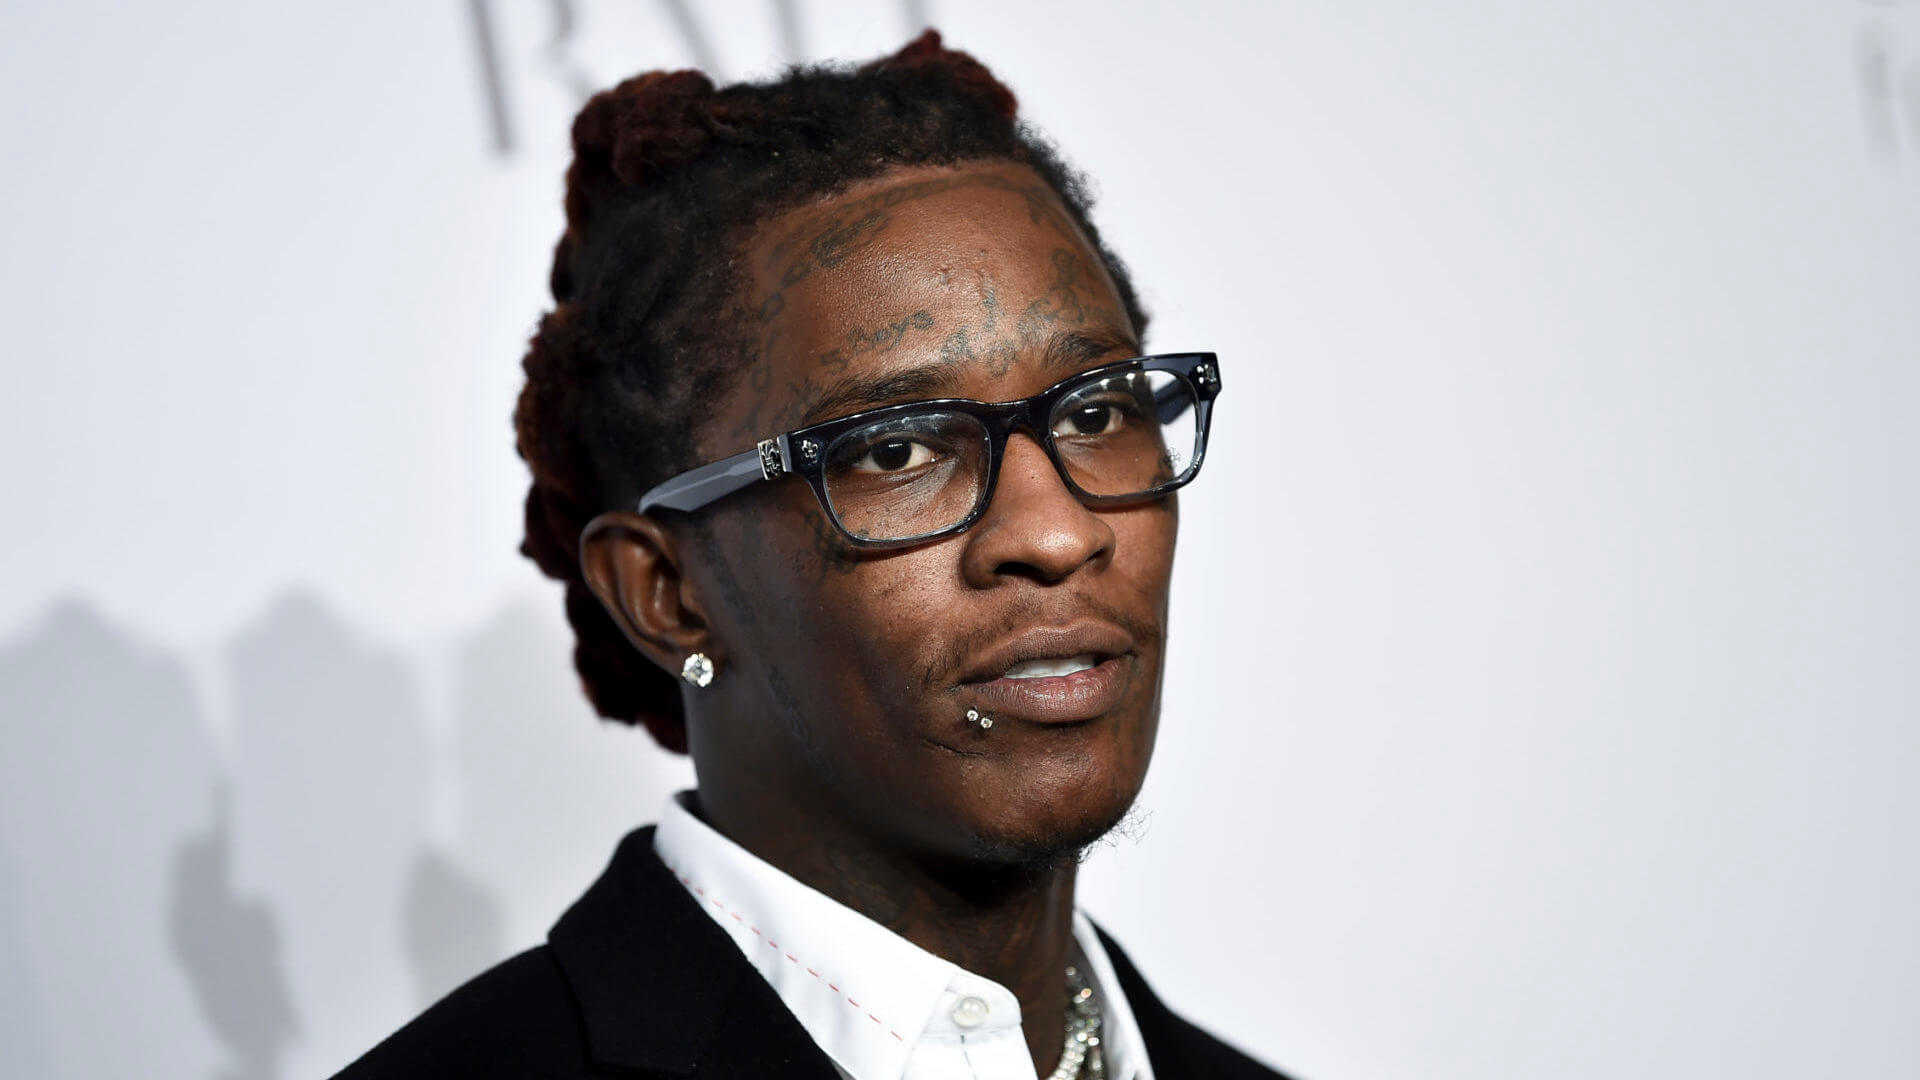 Young Thug attends the 3rd Annual Diamond Ball in New York Sept. 14, 2017